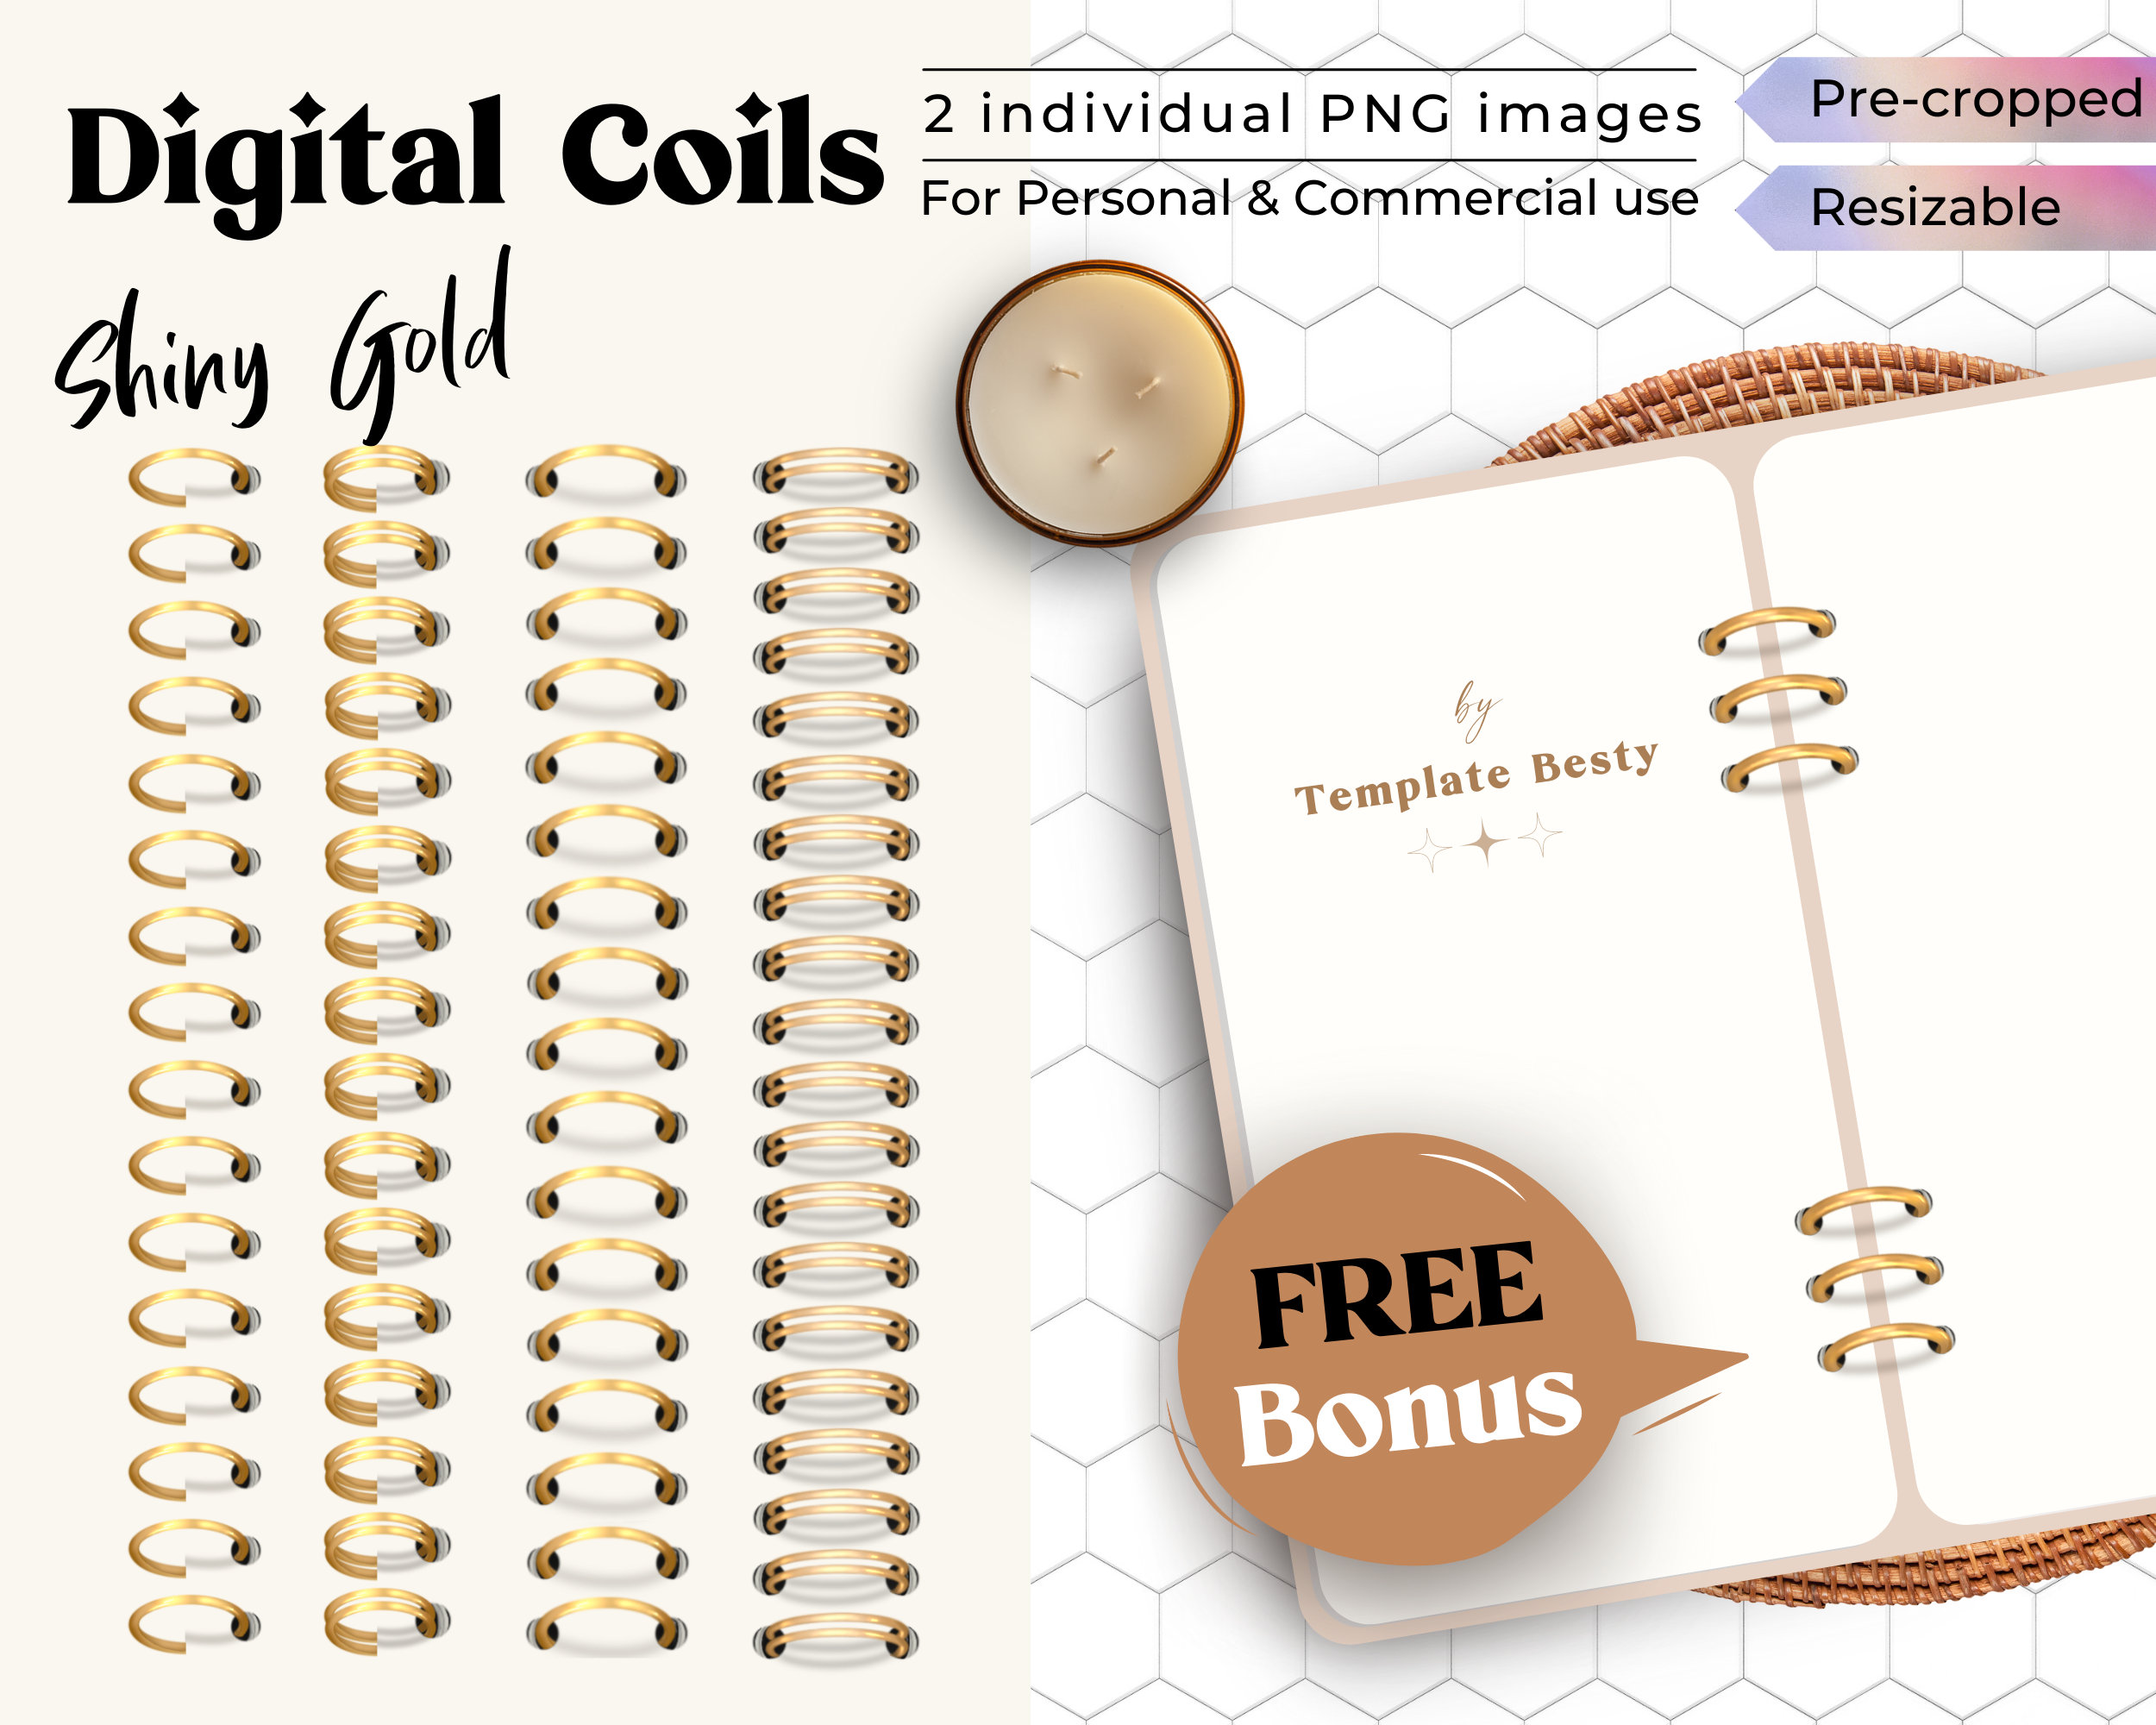 Realistic Digital Planner Rings, Metallic Gold Effect, Center Ring, Side  Rings, Pre-cropped PNG, Gold Binder Ring, Goodnotes, Best Seller 